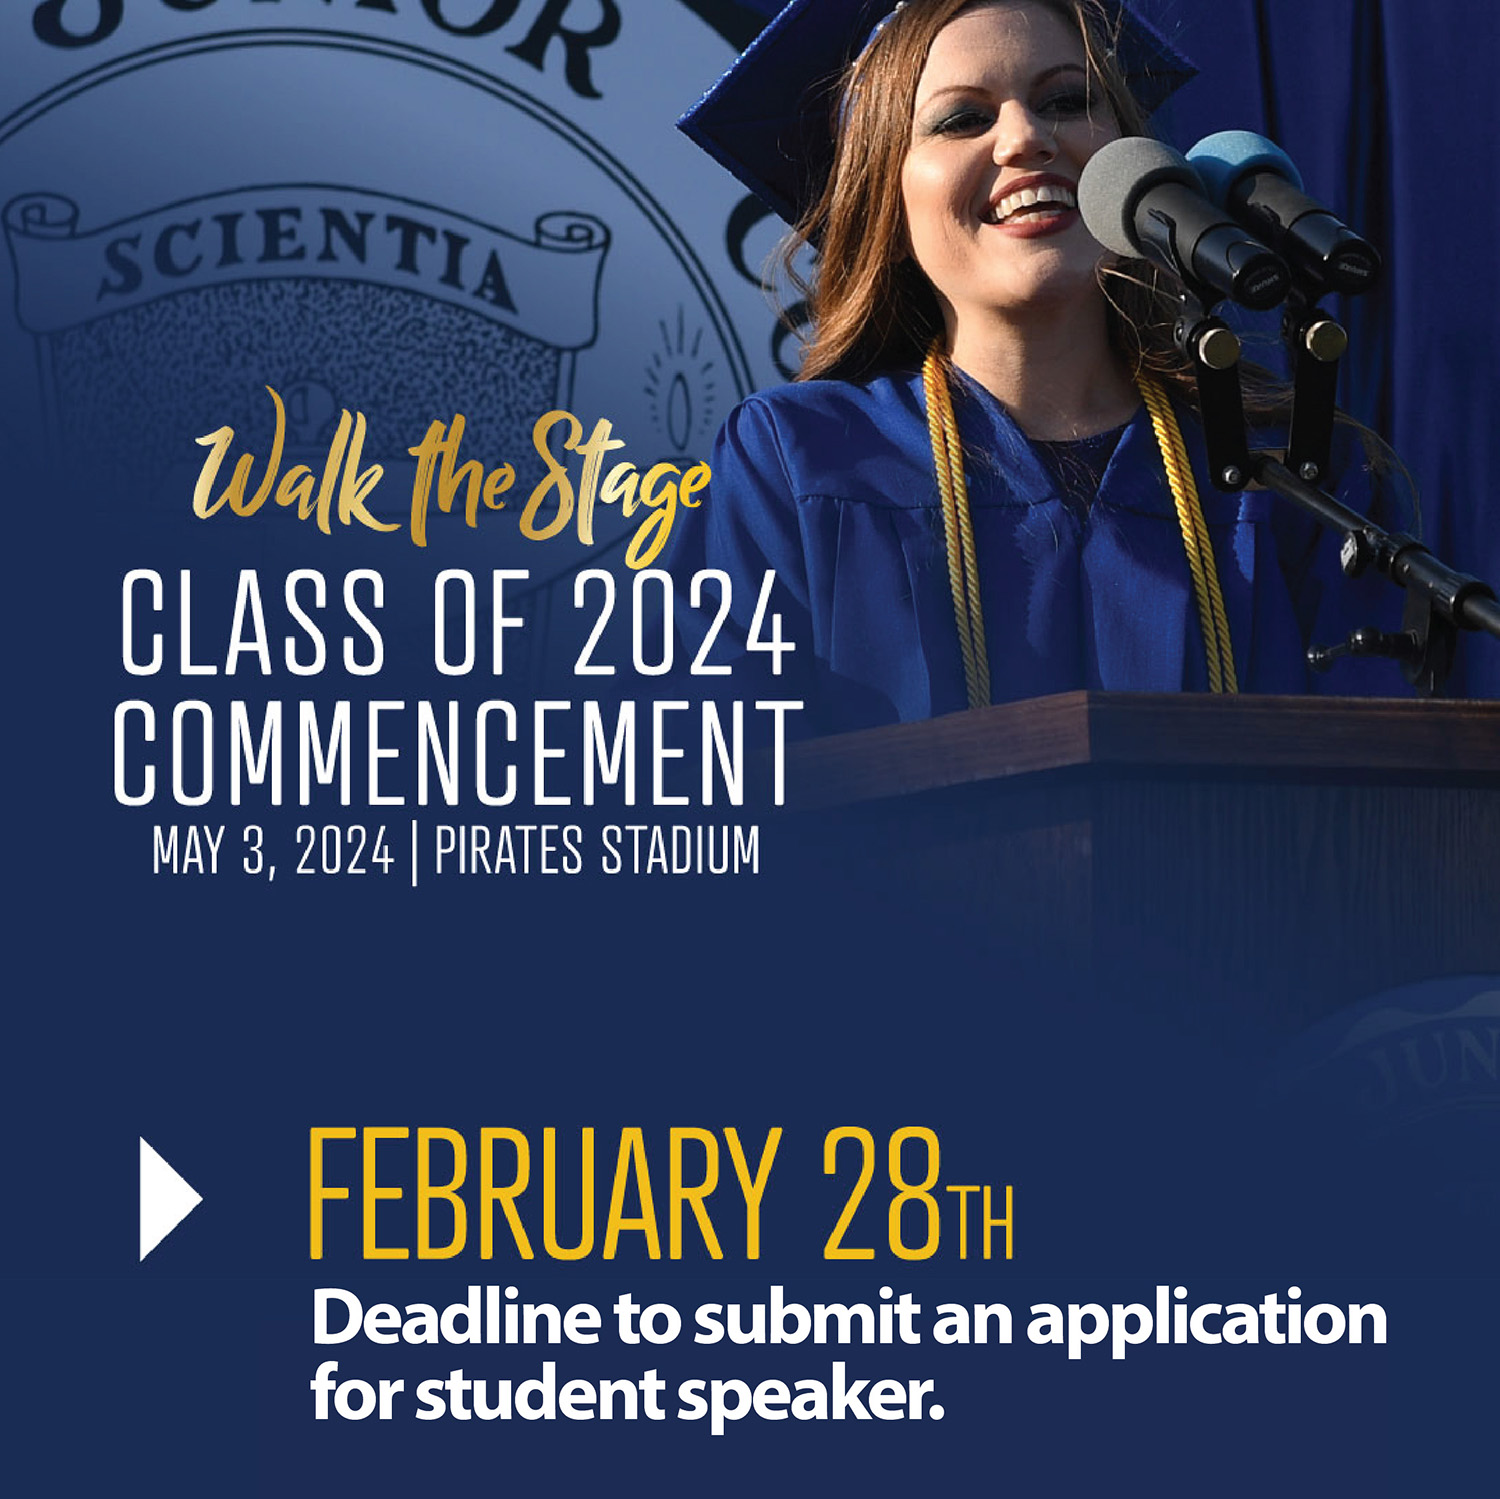 Apply to be a Commencement Speaker on Feb. 28th